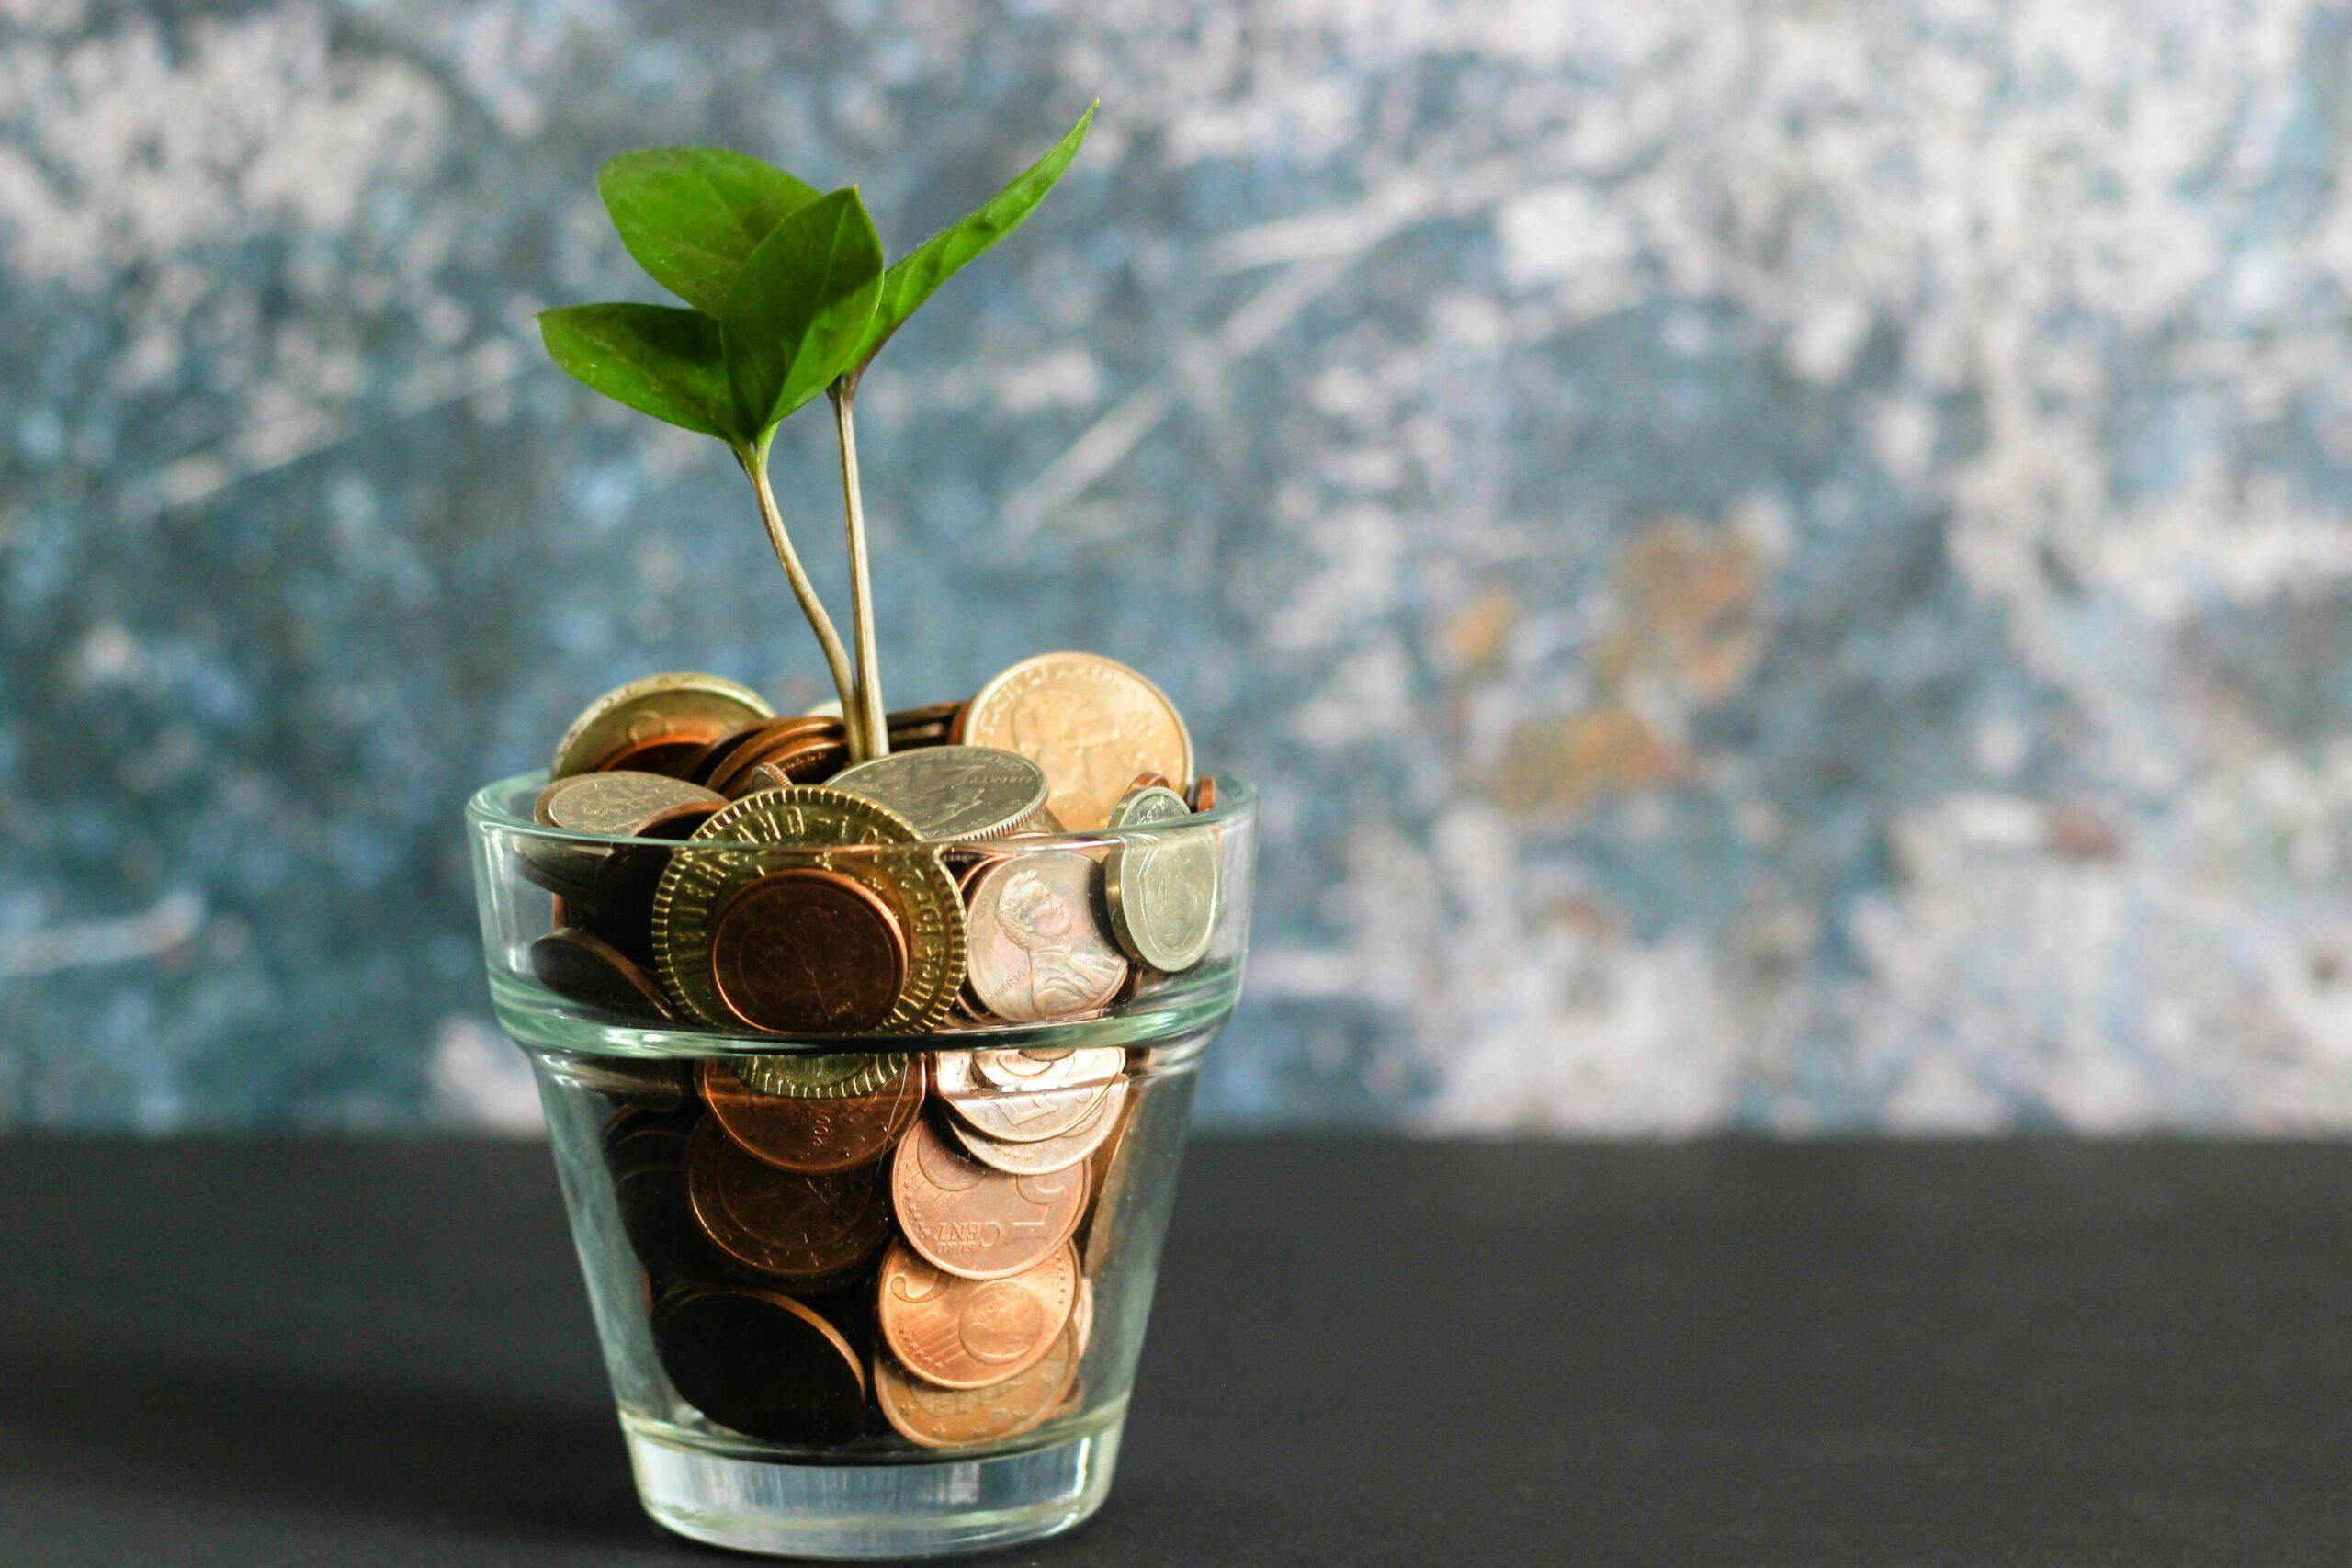 Money jar with plant. A clear glass container on a table holds cash and a green plant, representing financial planning.